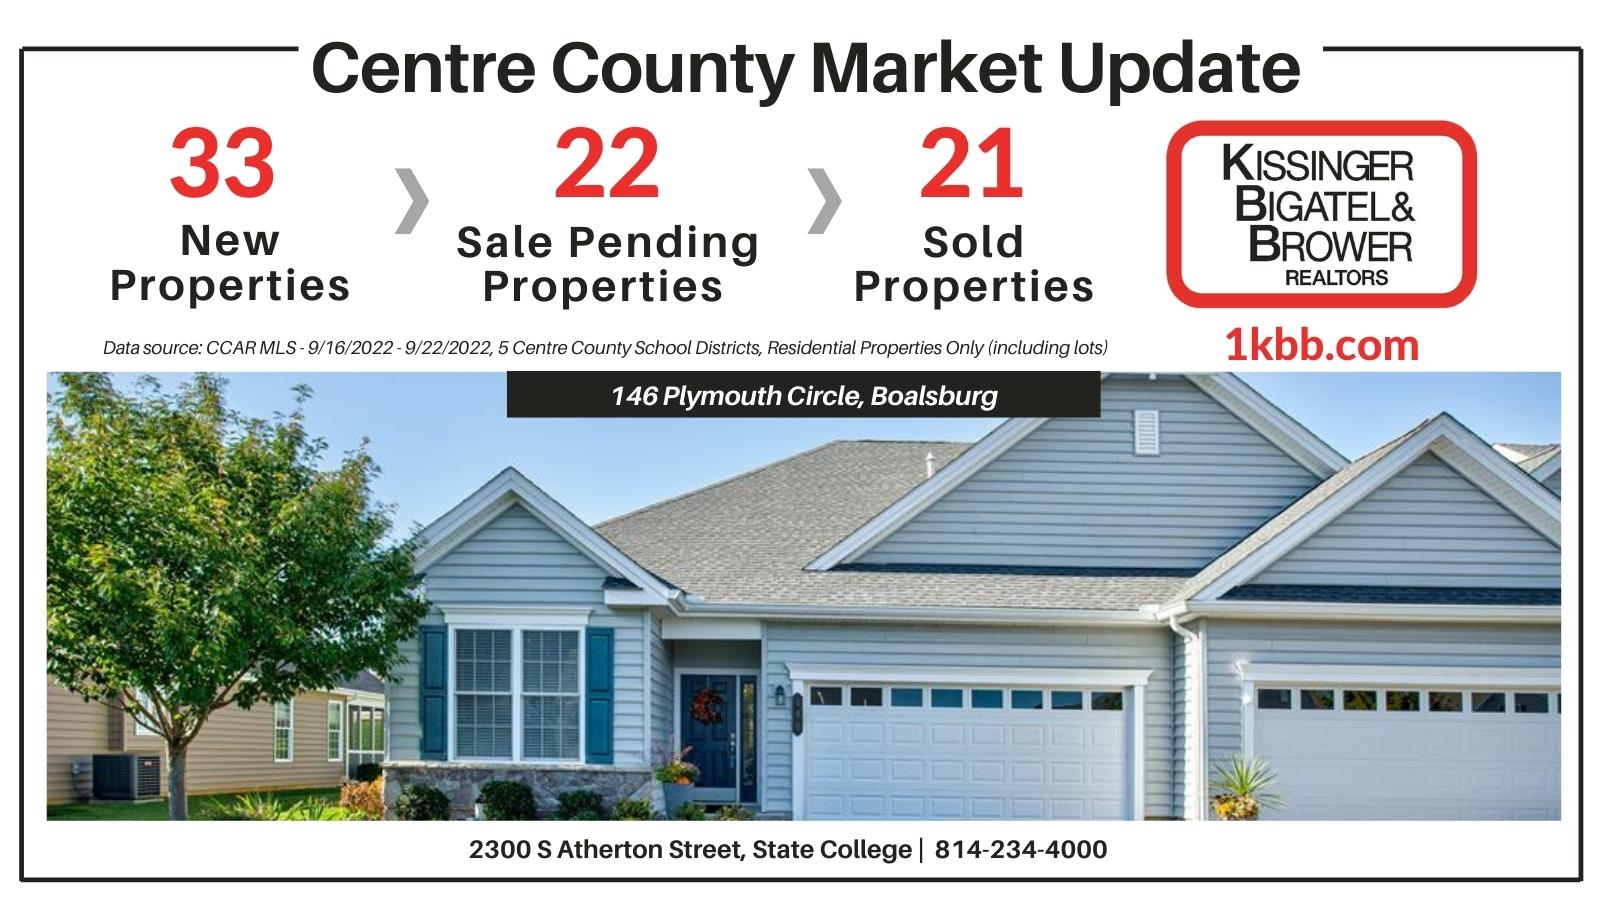 Market Update Report for 9/16-9/21/2022 in Centre County, PA